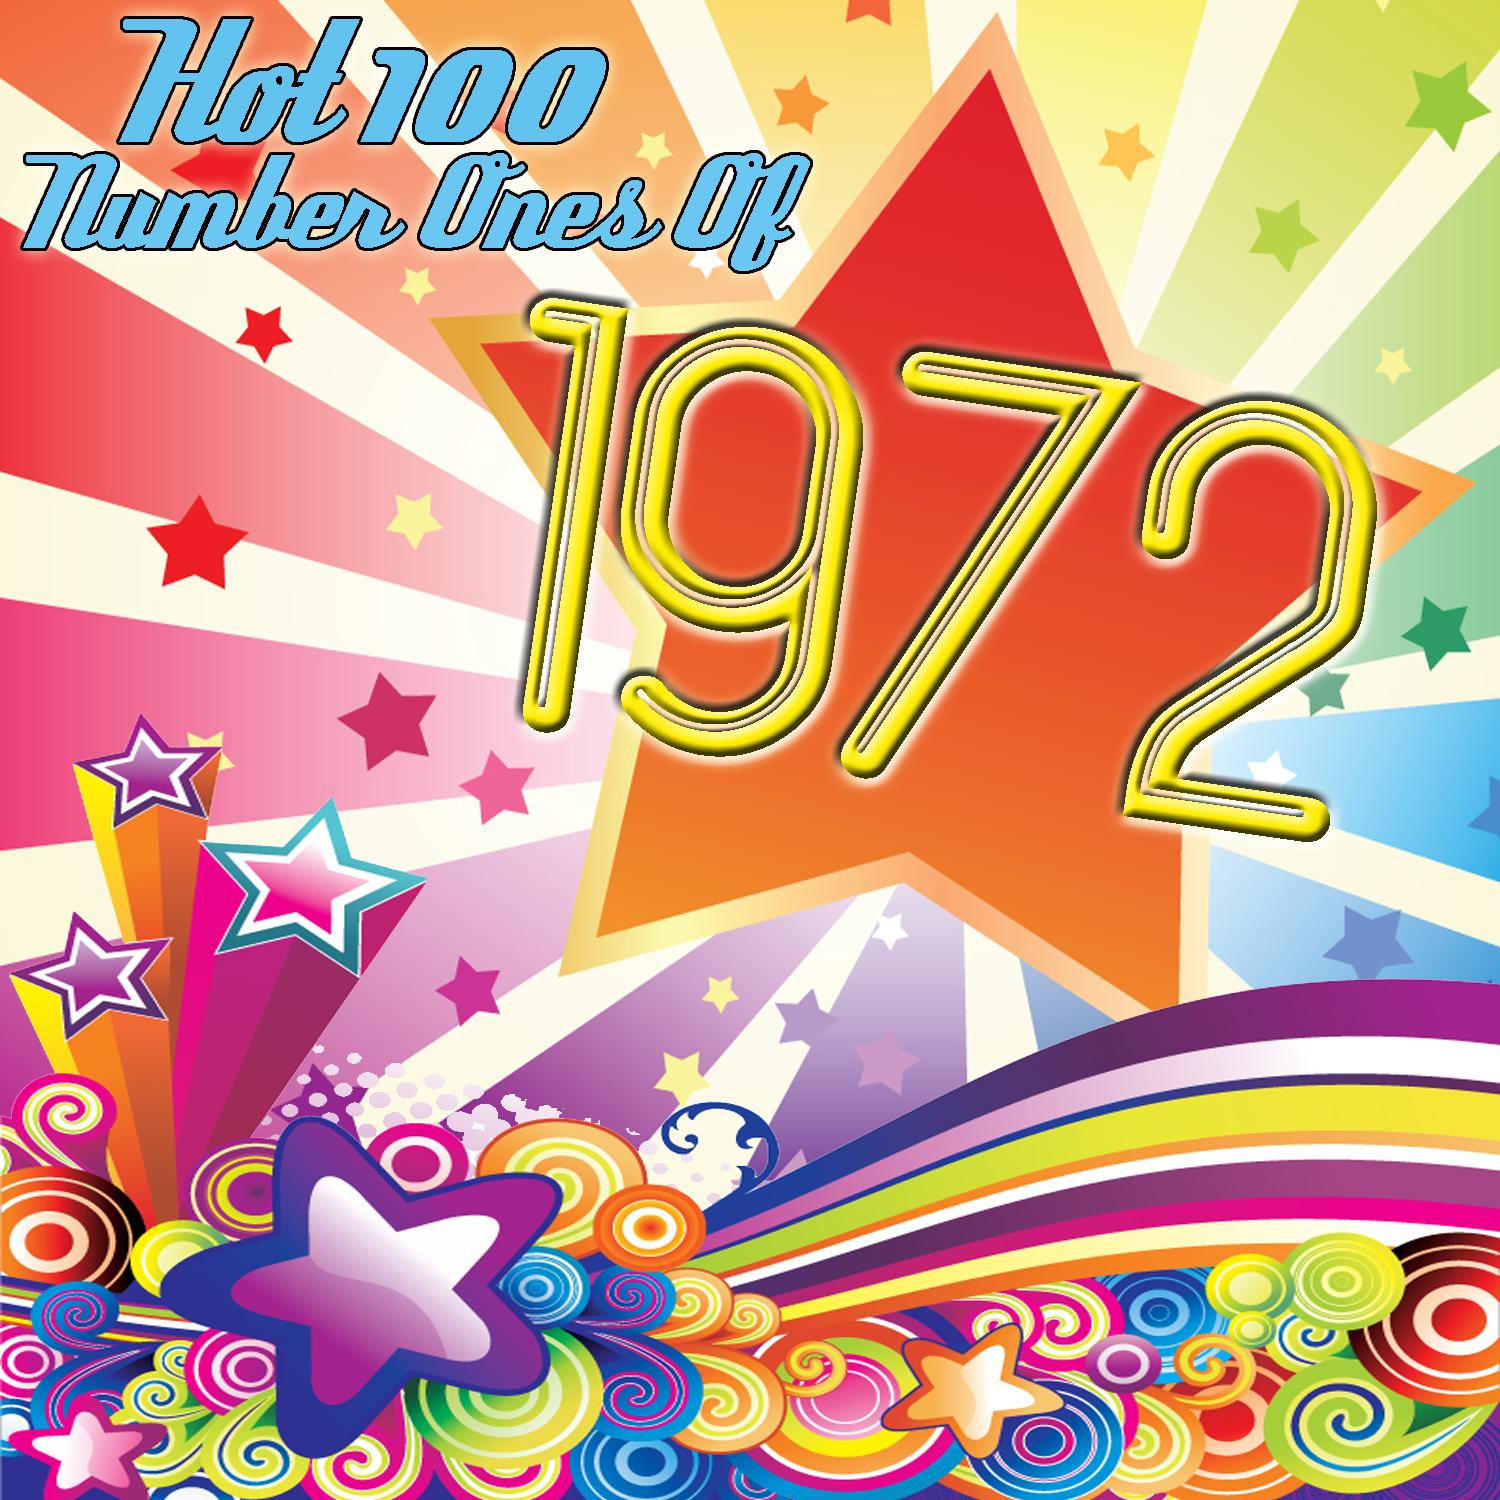 Hot 100 Number Ones Of 1972